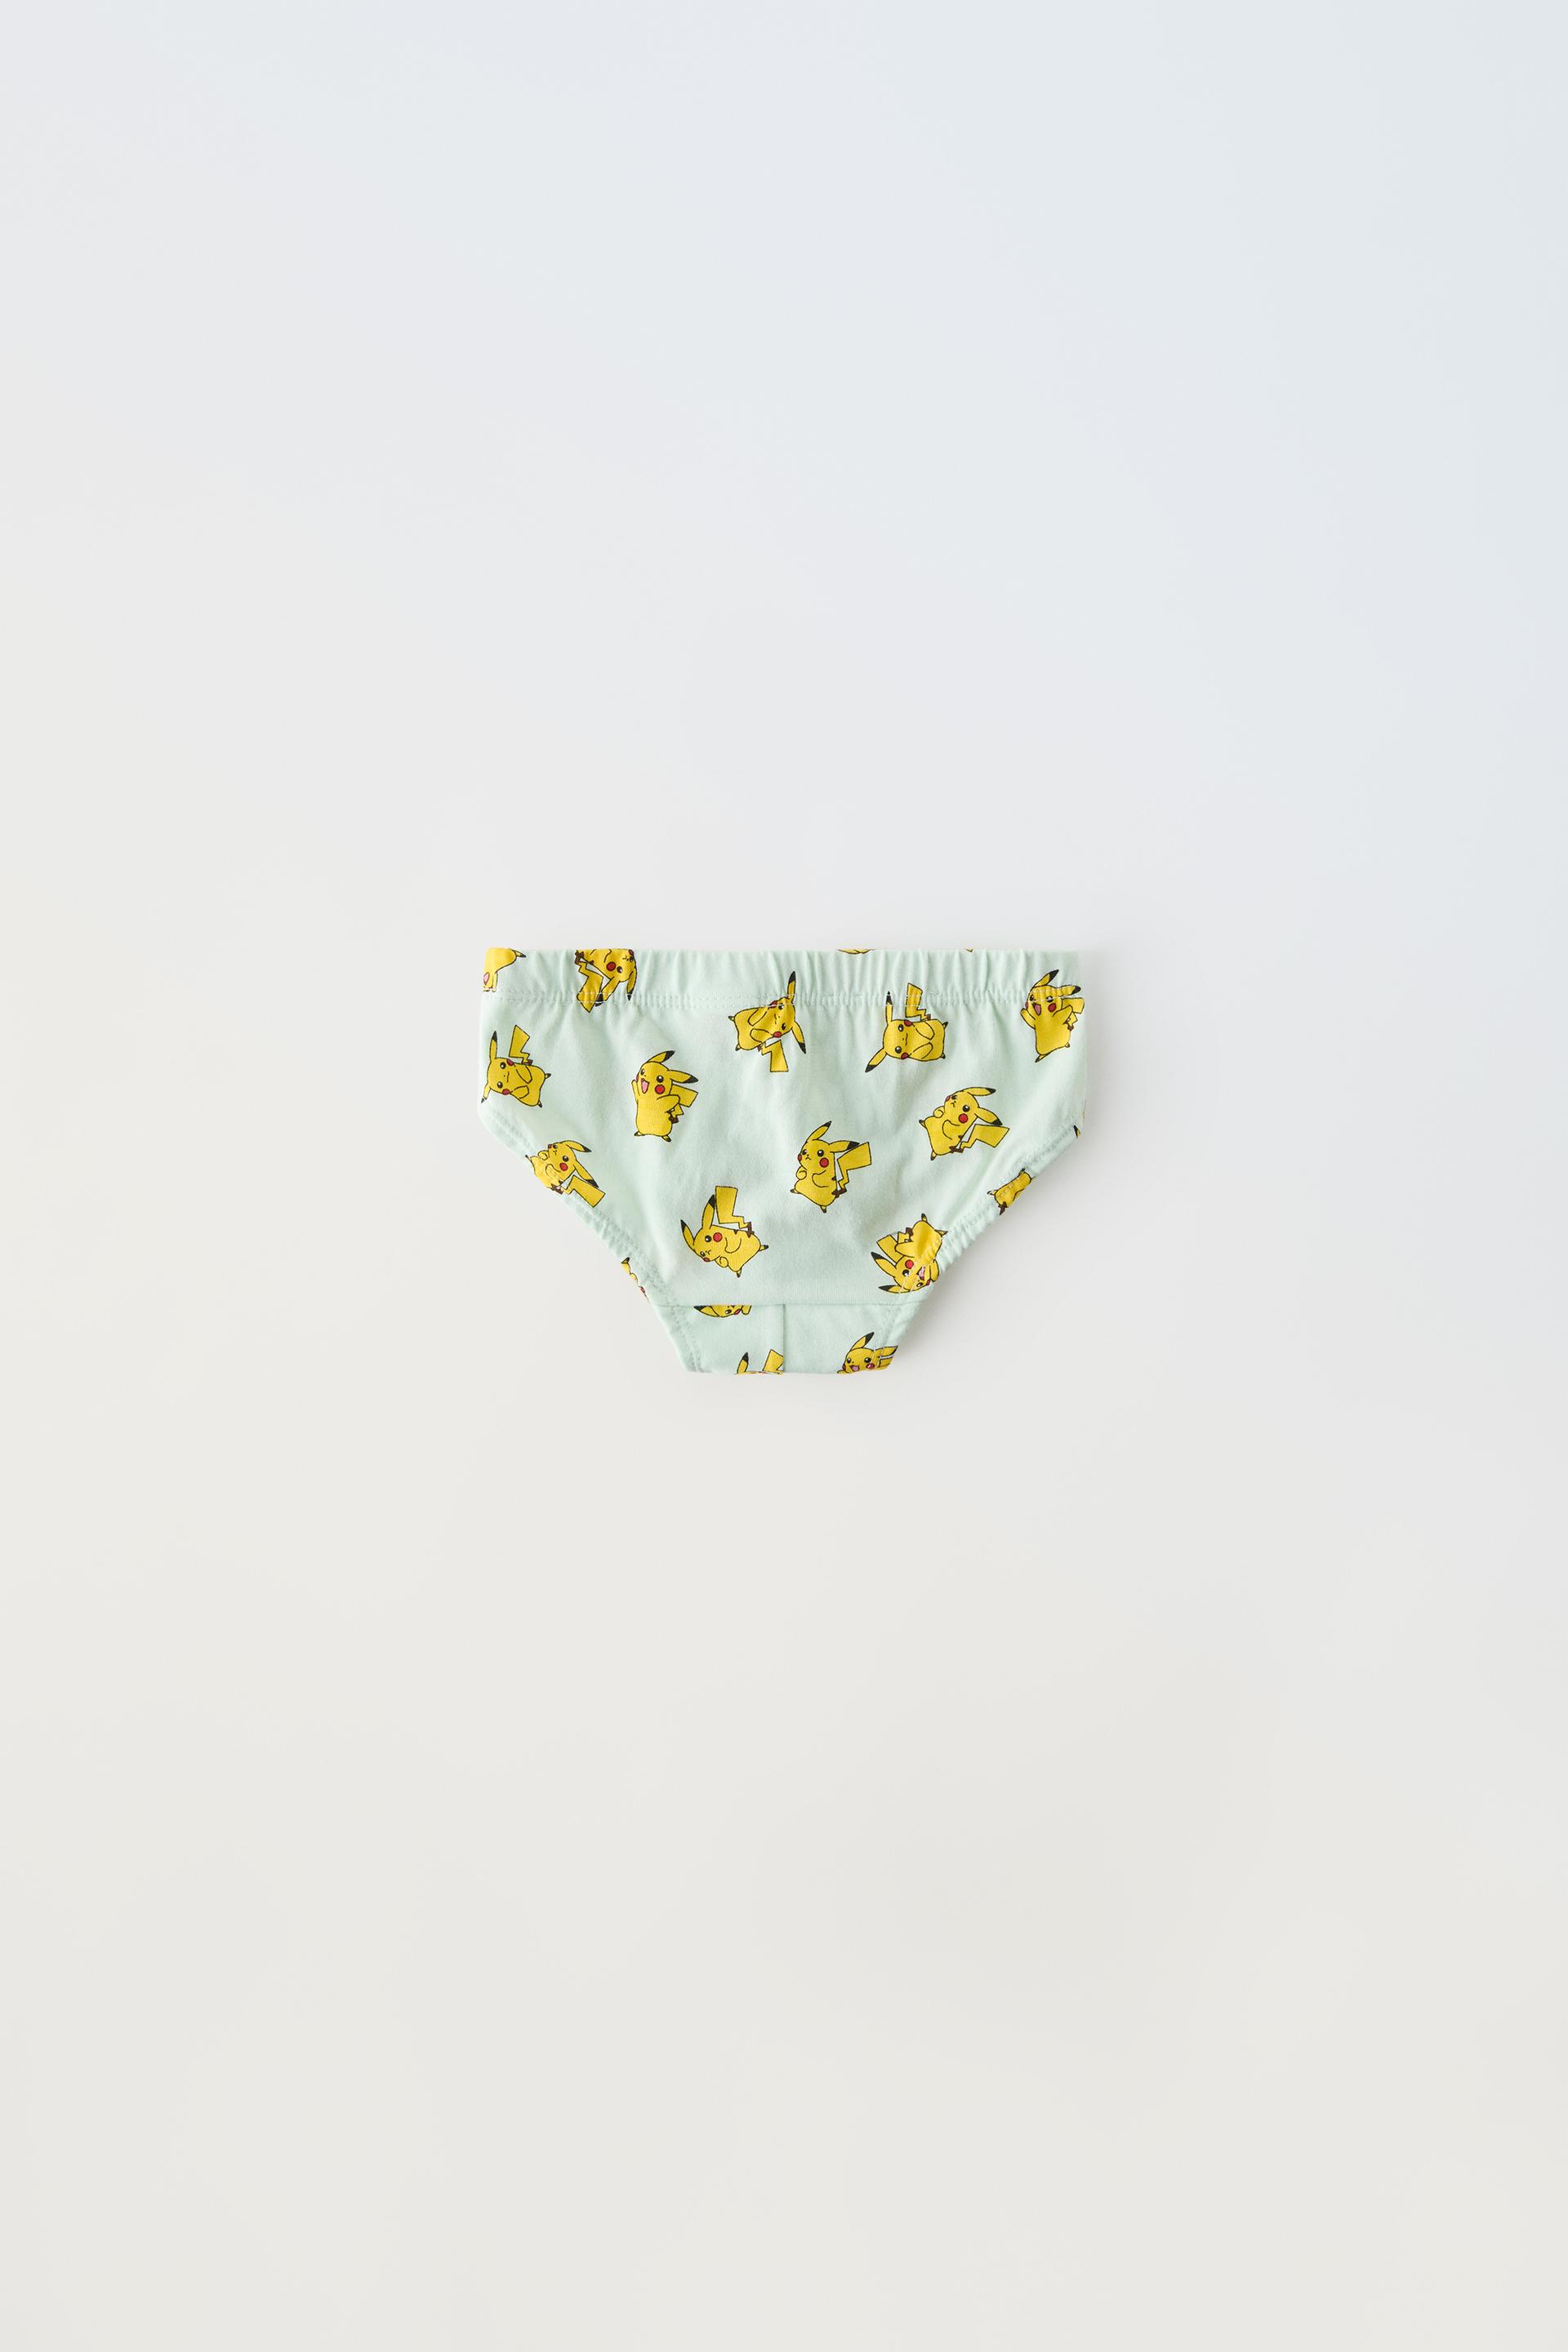 Zara 6-14 YEARS/ TWO-PACK OF POKÉMON ™ BOXERS